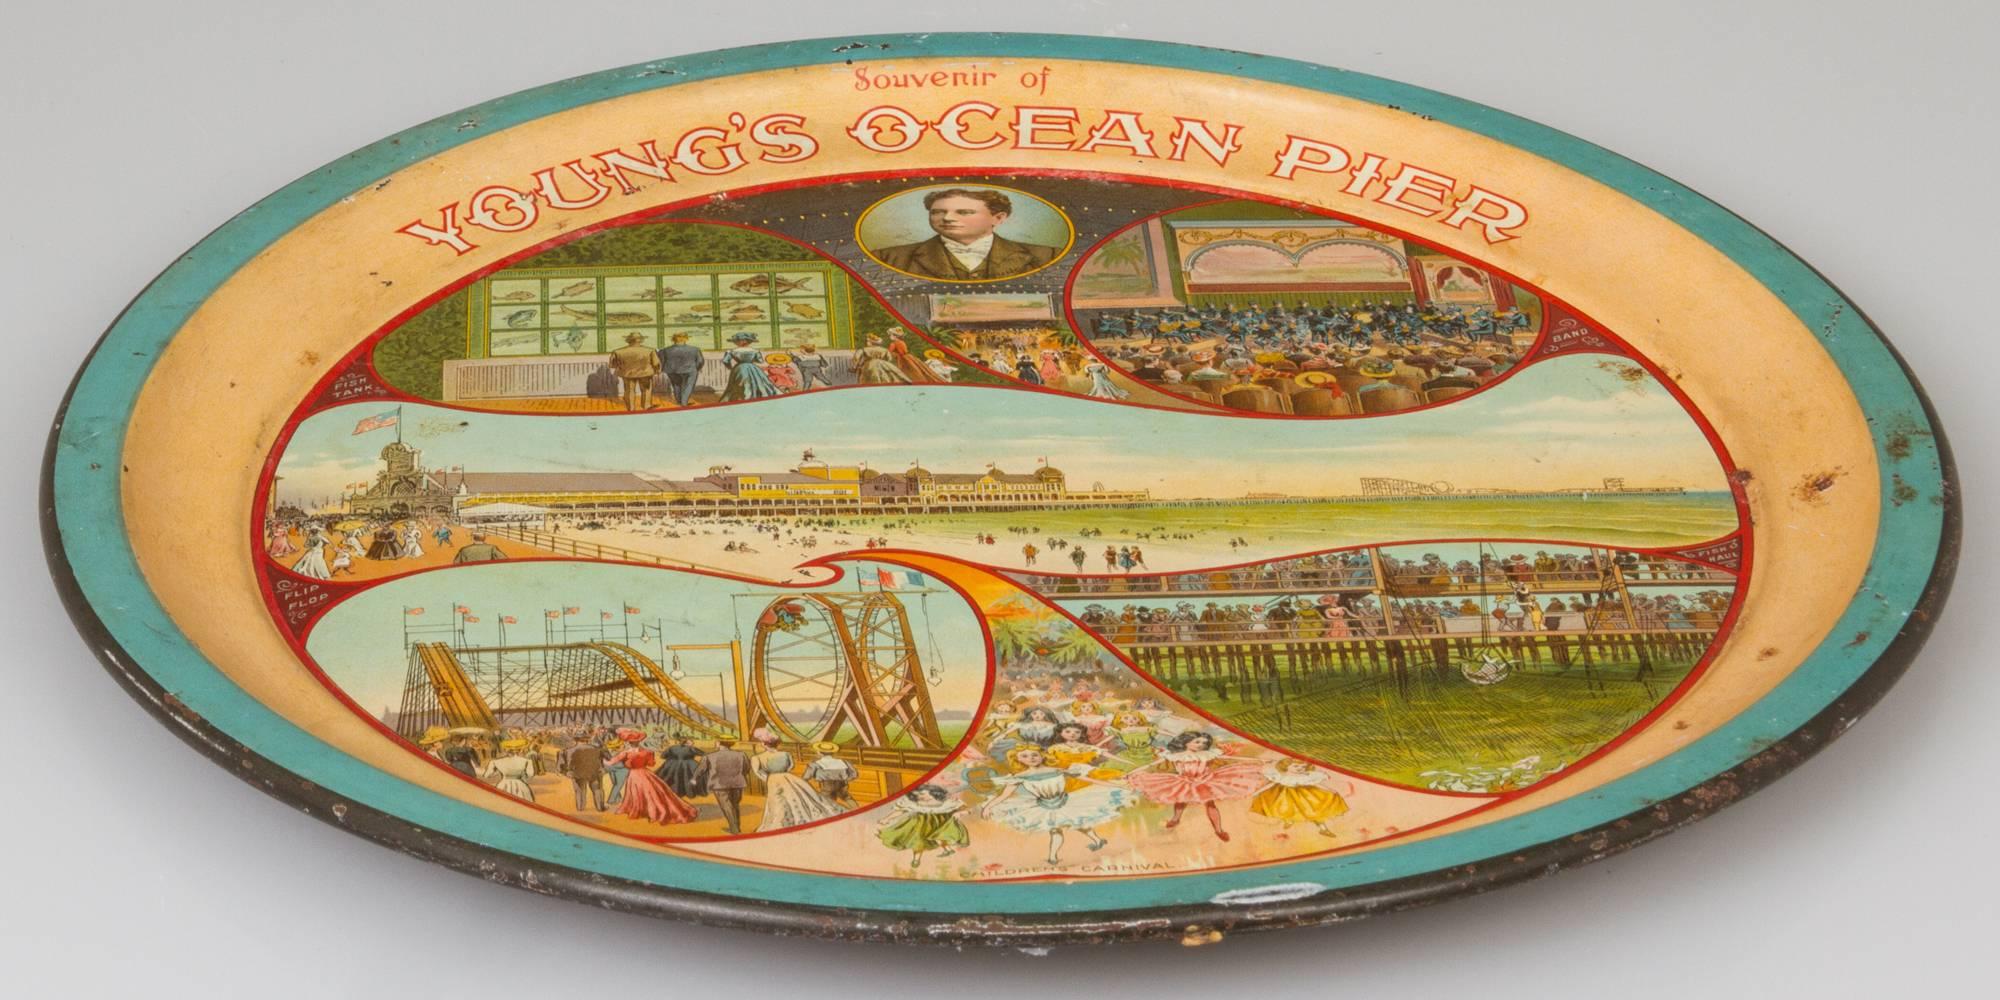 This metal bar tray that shows glimpses of all the marvels of the New Jersey Boardwalk and is made by the CW Shonk Co of Chicago.